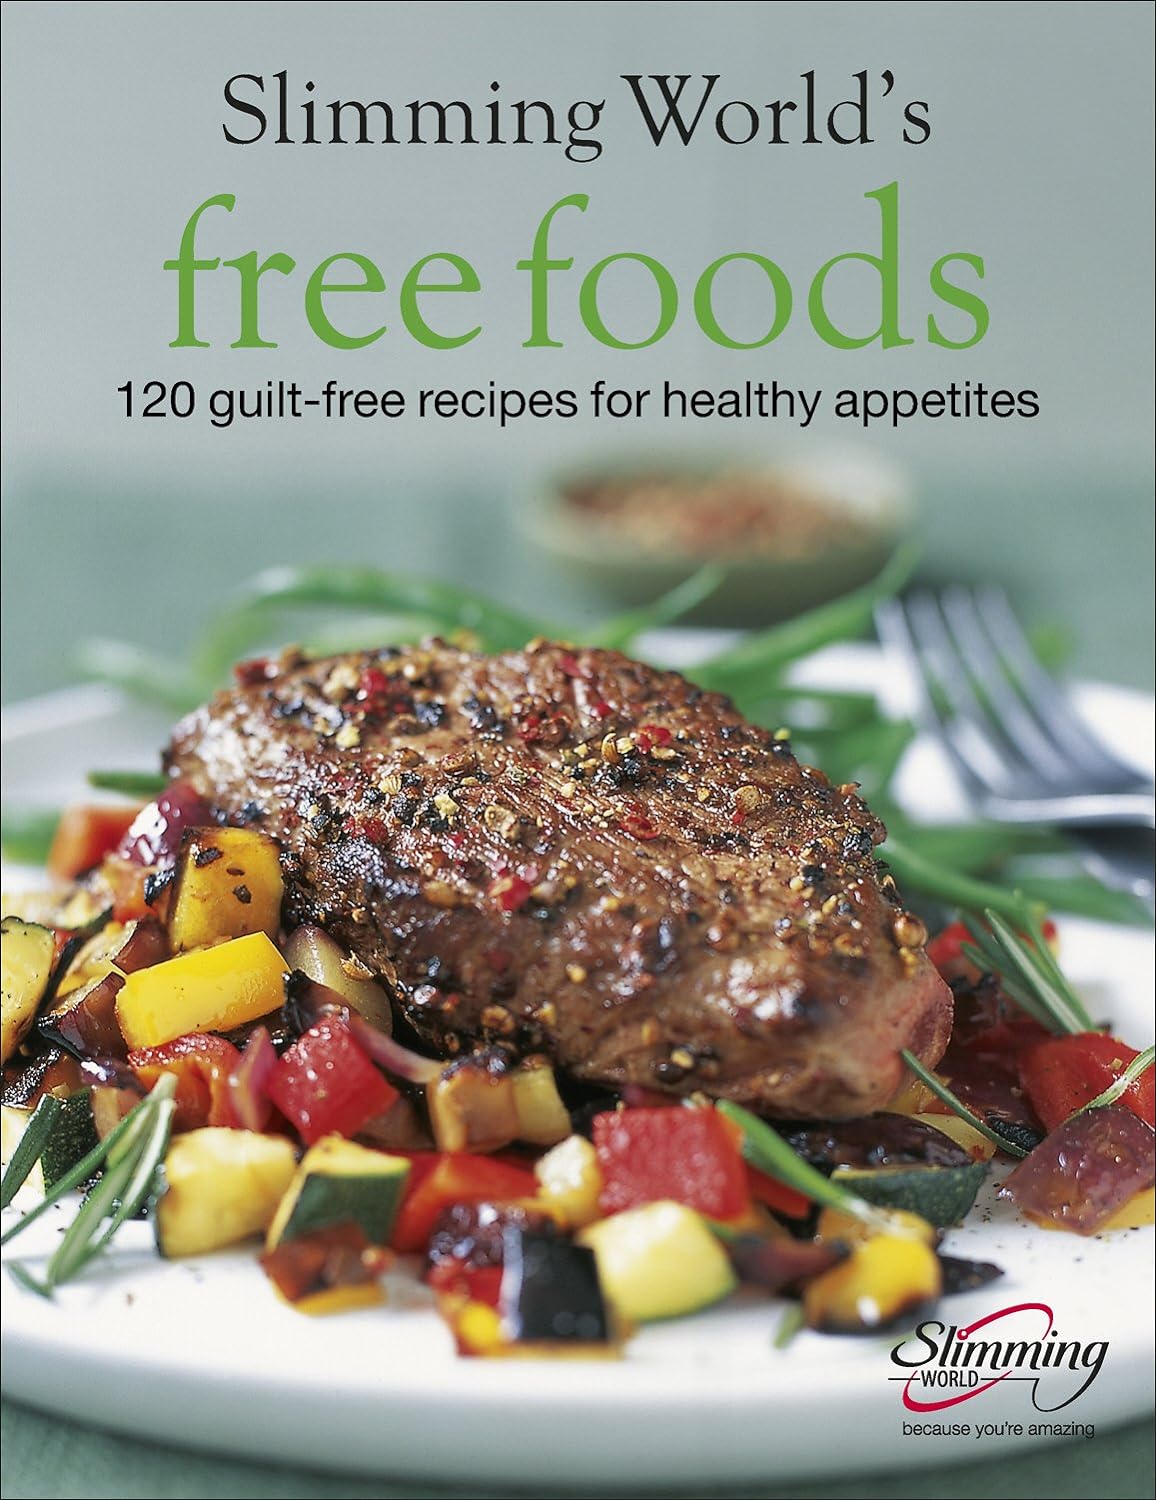 Slimming World Free Foods: 120 guilt-free recipes for healthy appetites